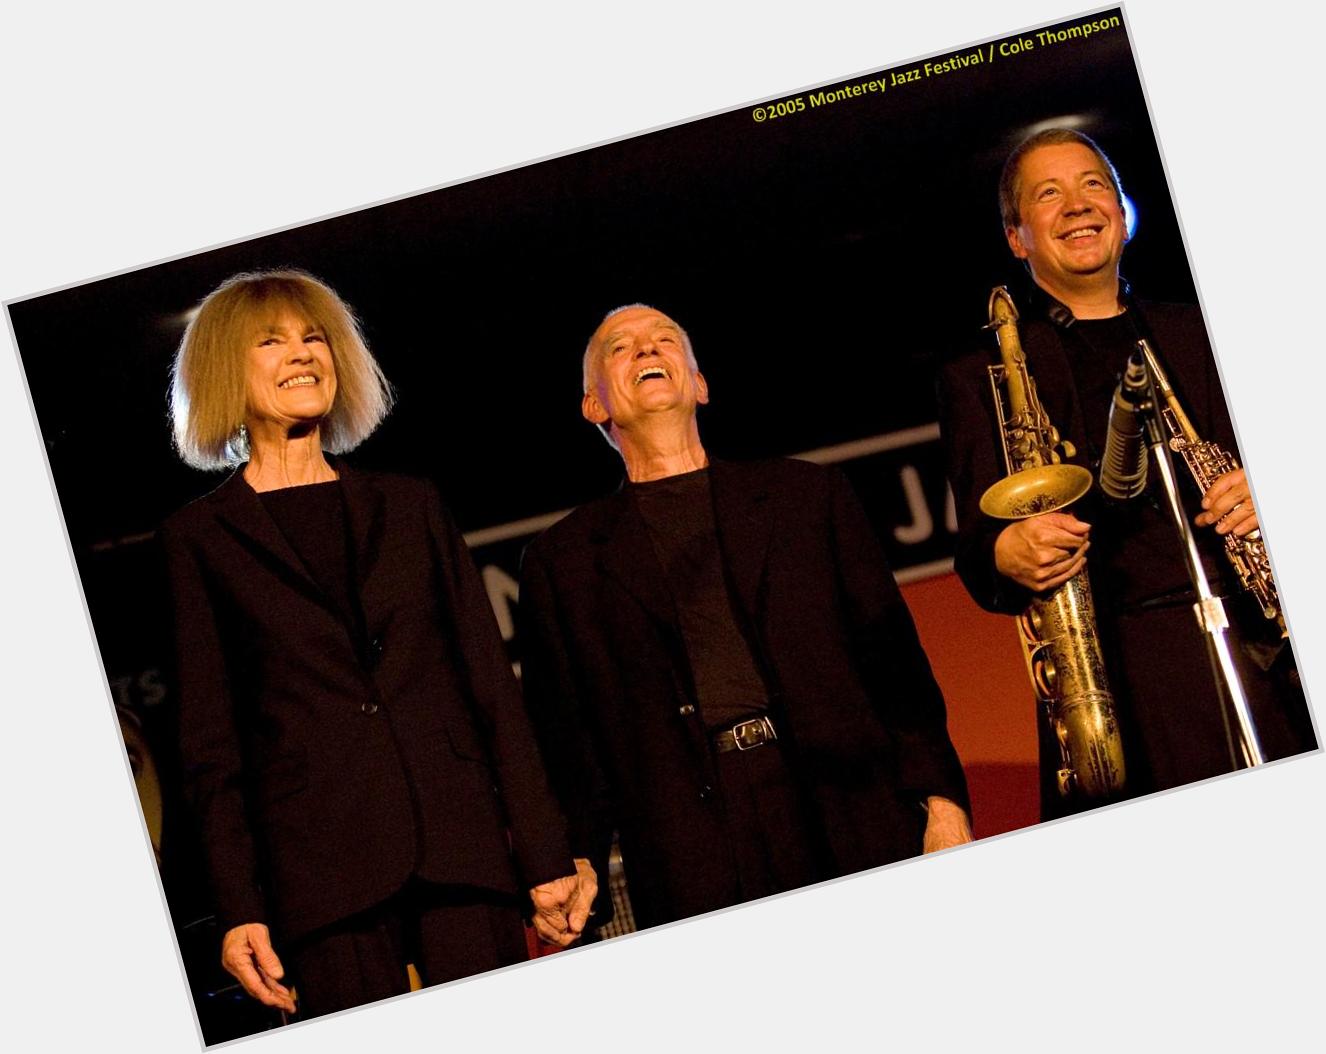 Happy Birthday today (May 11) to Carla Bley! Image: 2005 with Steve Swallow & 